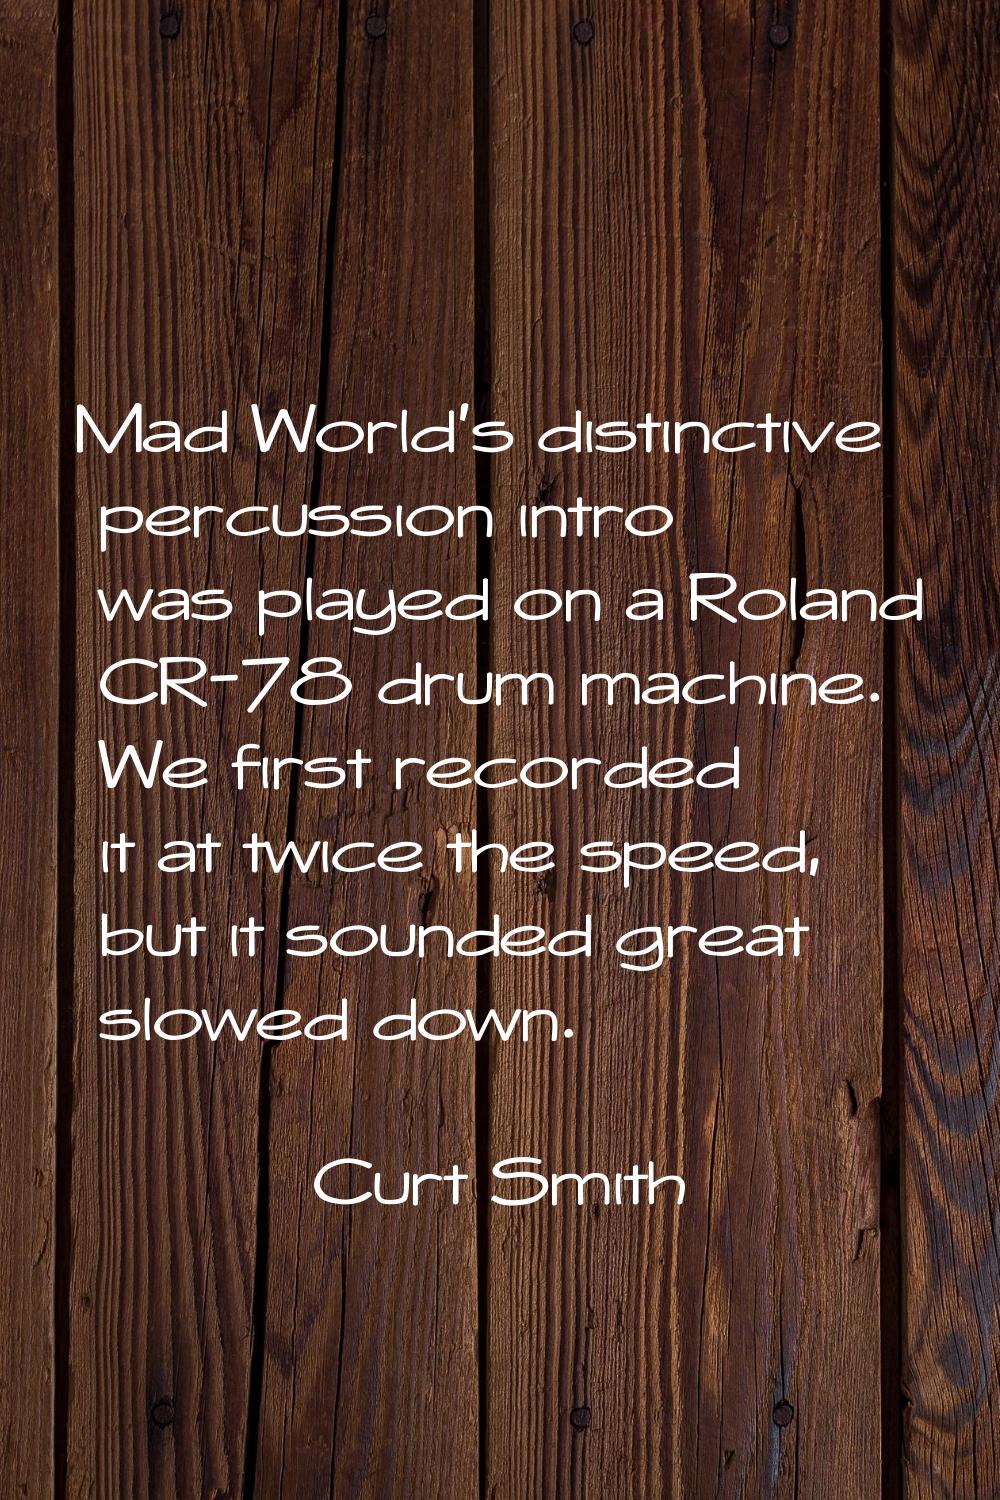 Mad World's distinctive percussion intro was played on a Roland CR-78 drum machine. We first record